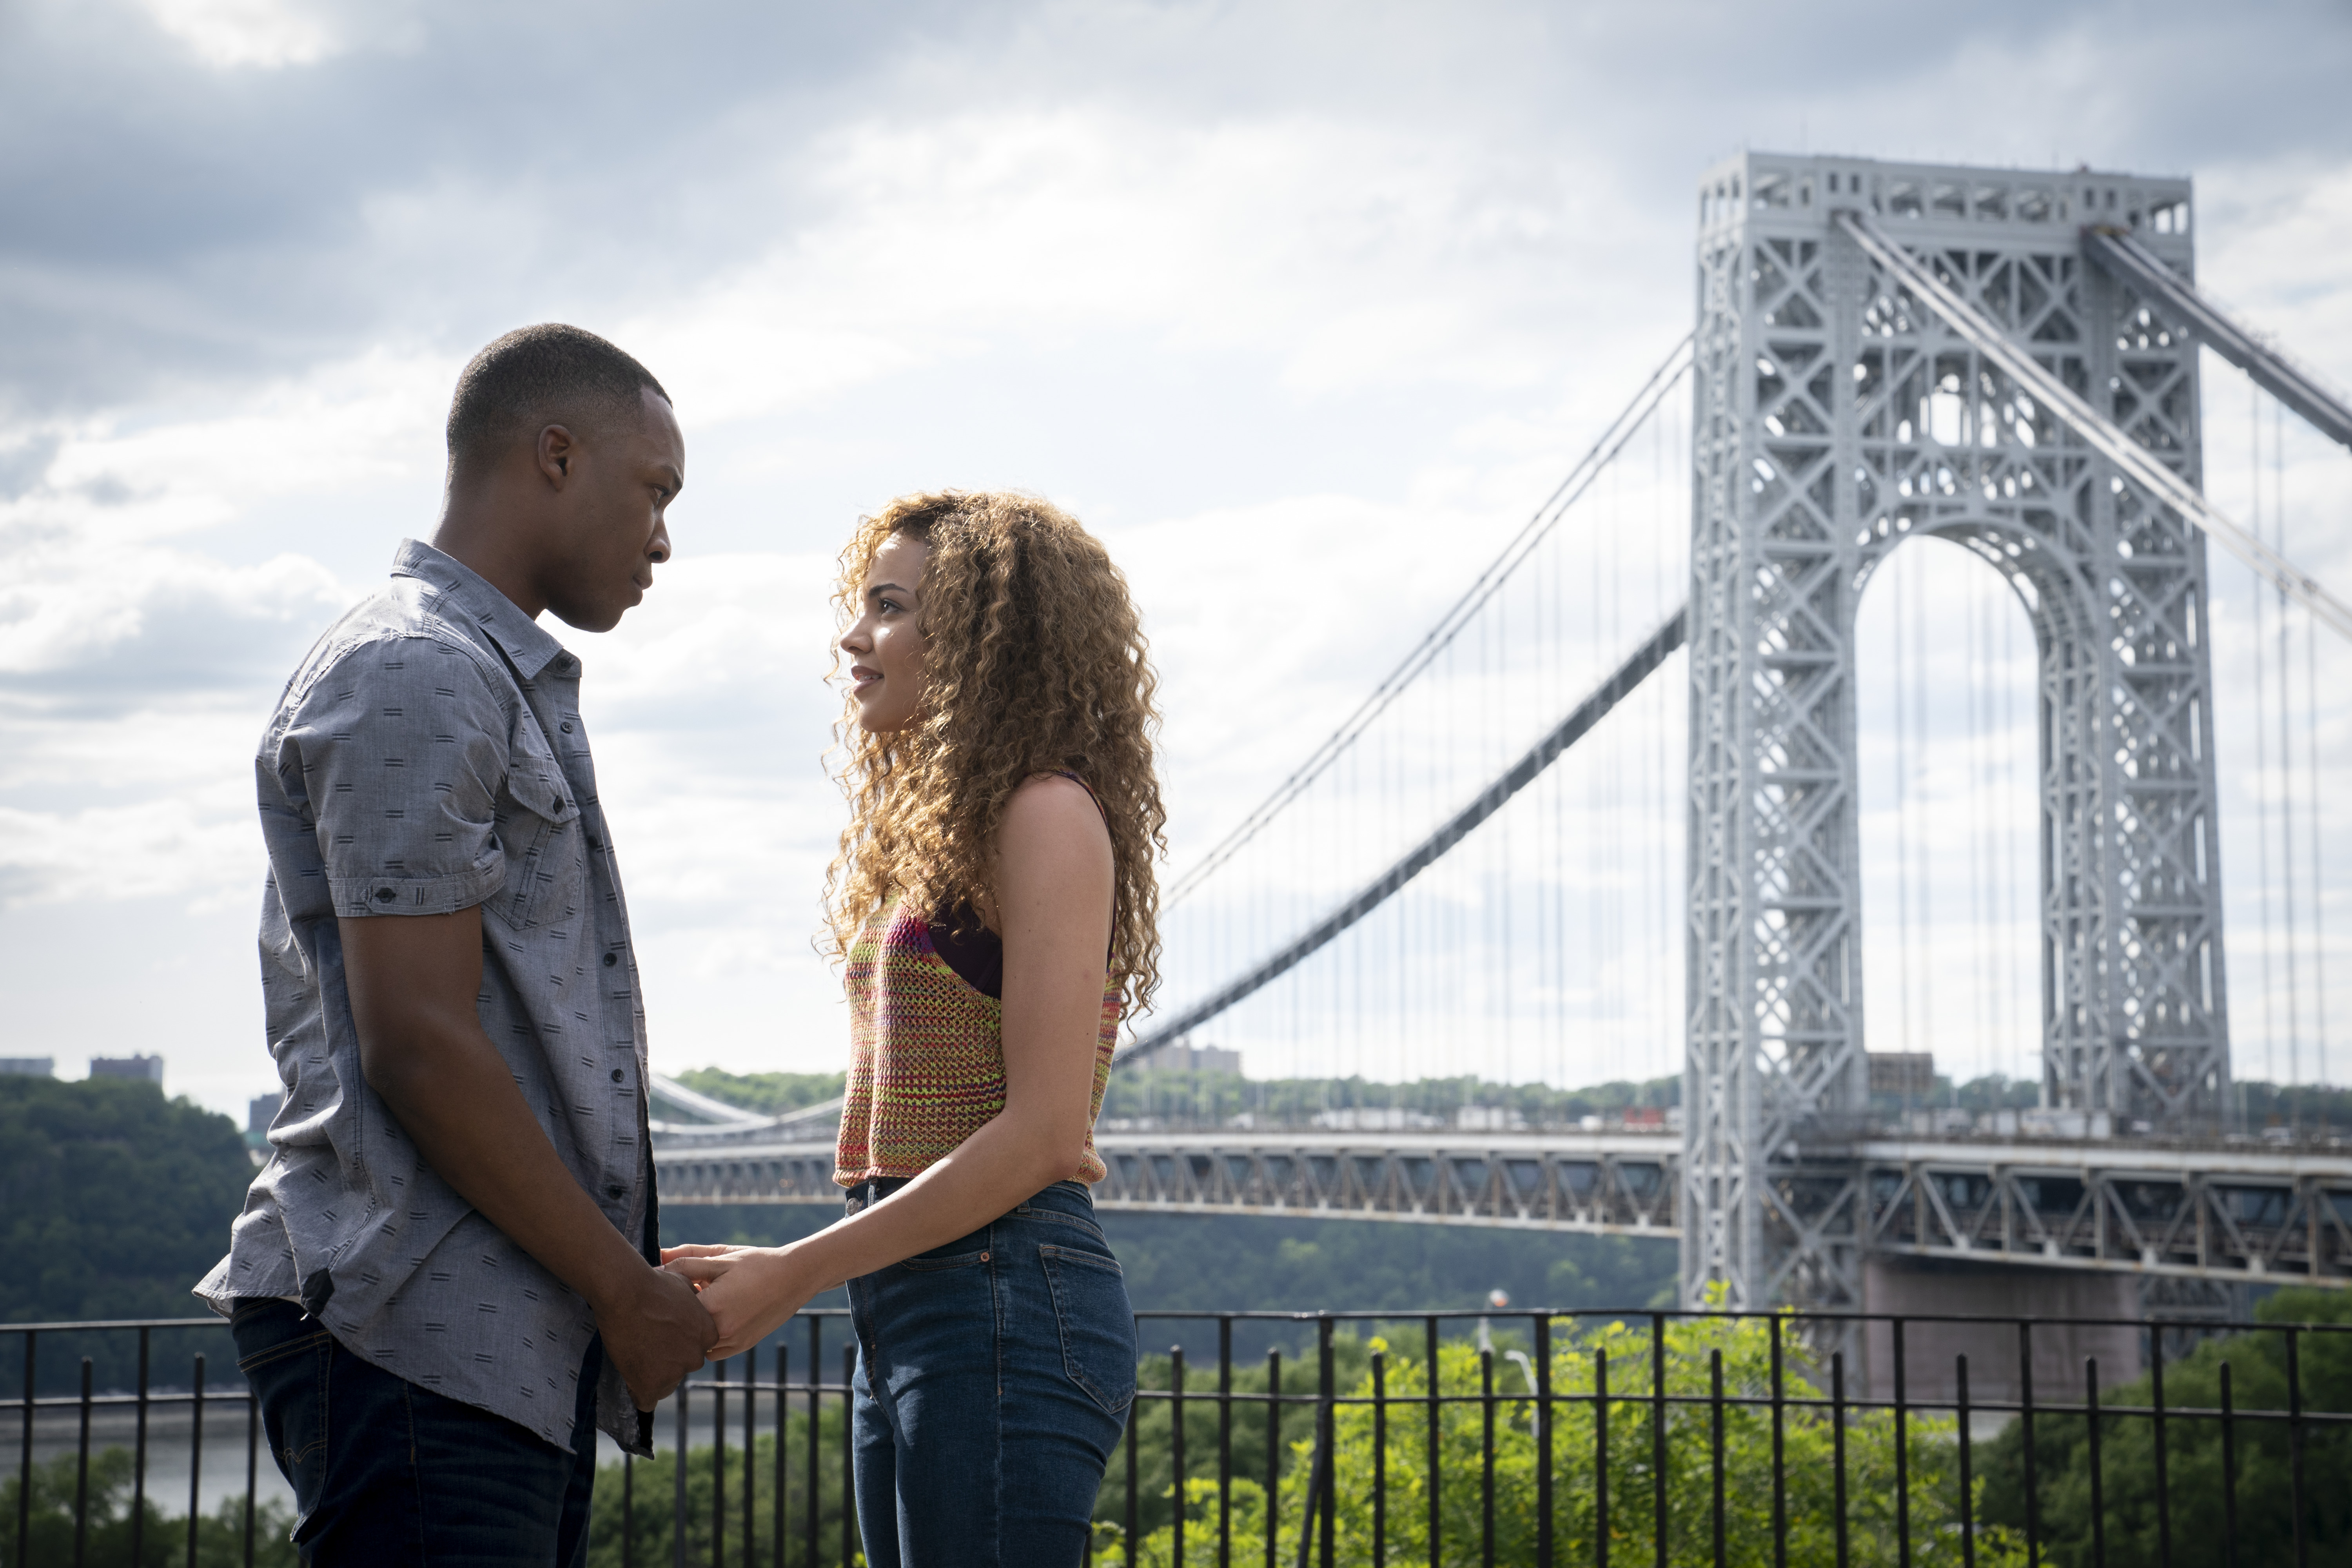 A couple stand facing one another while holding hands, with a New York bridge in the background.